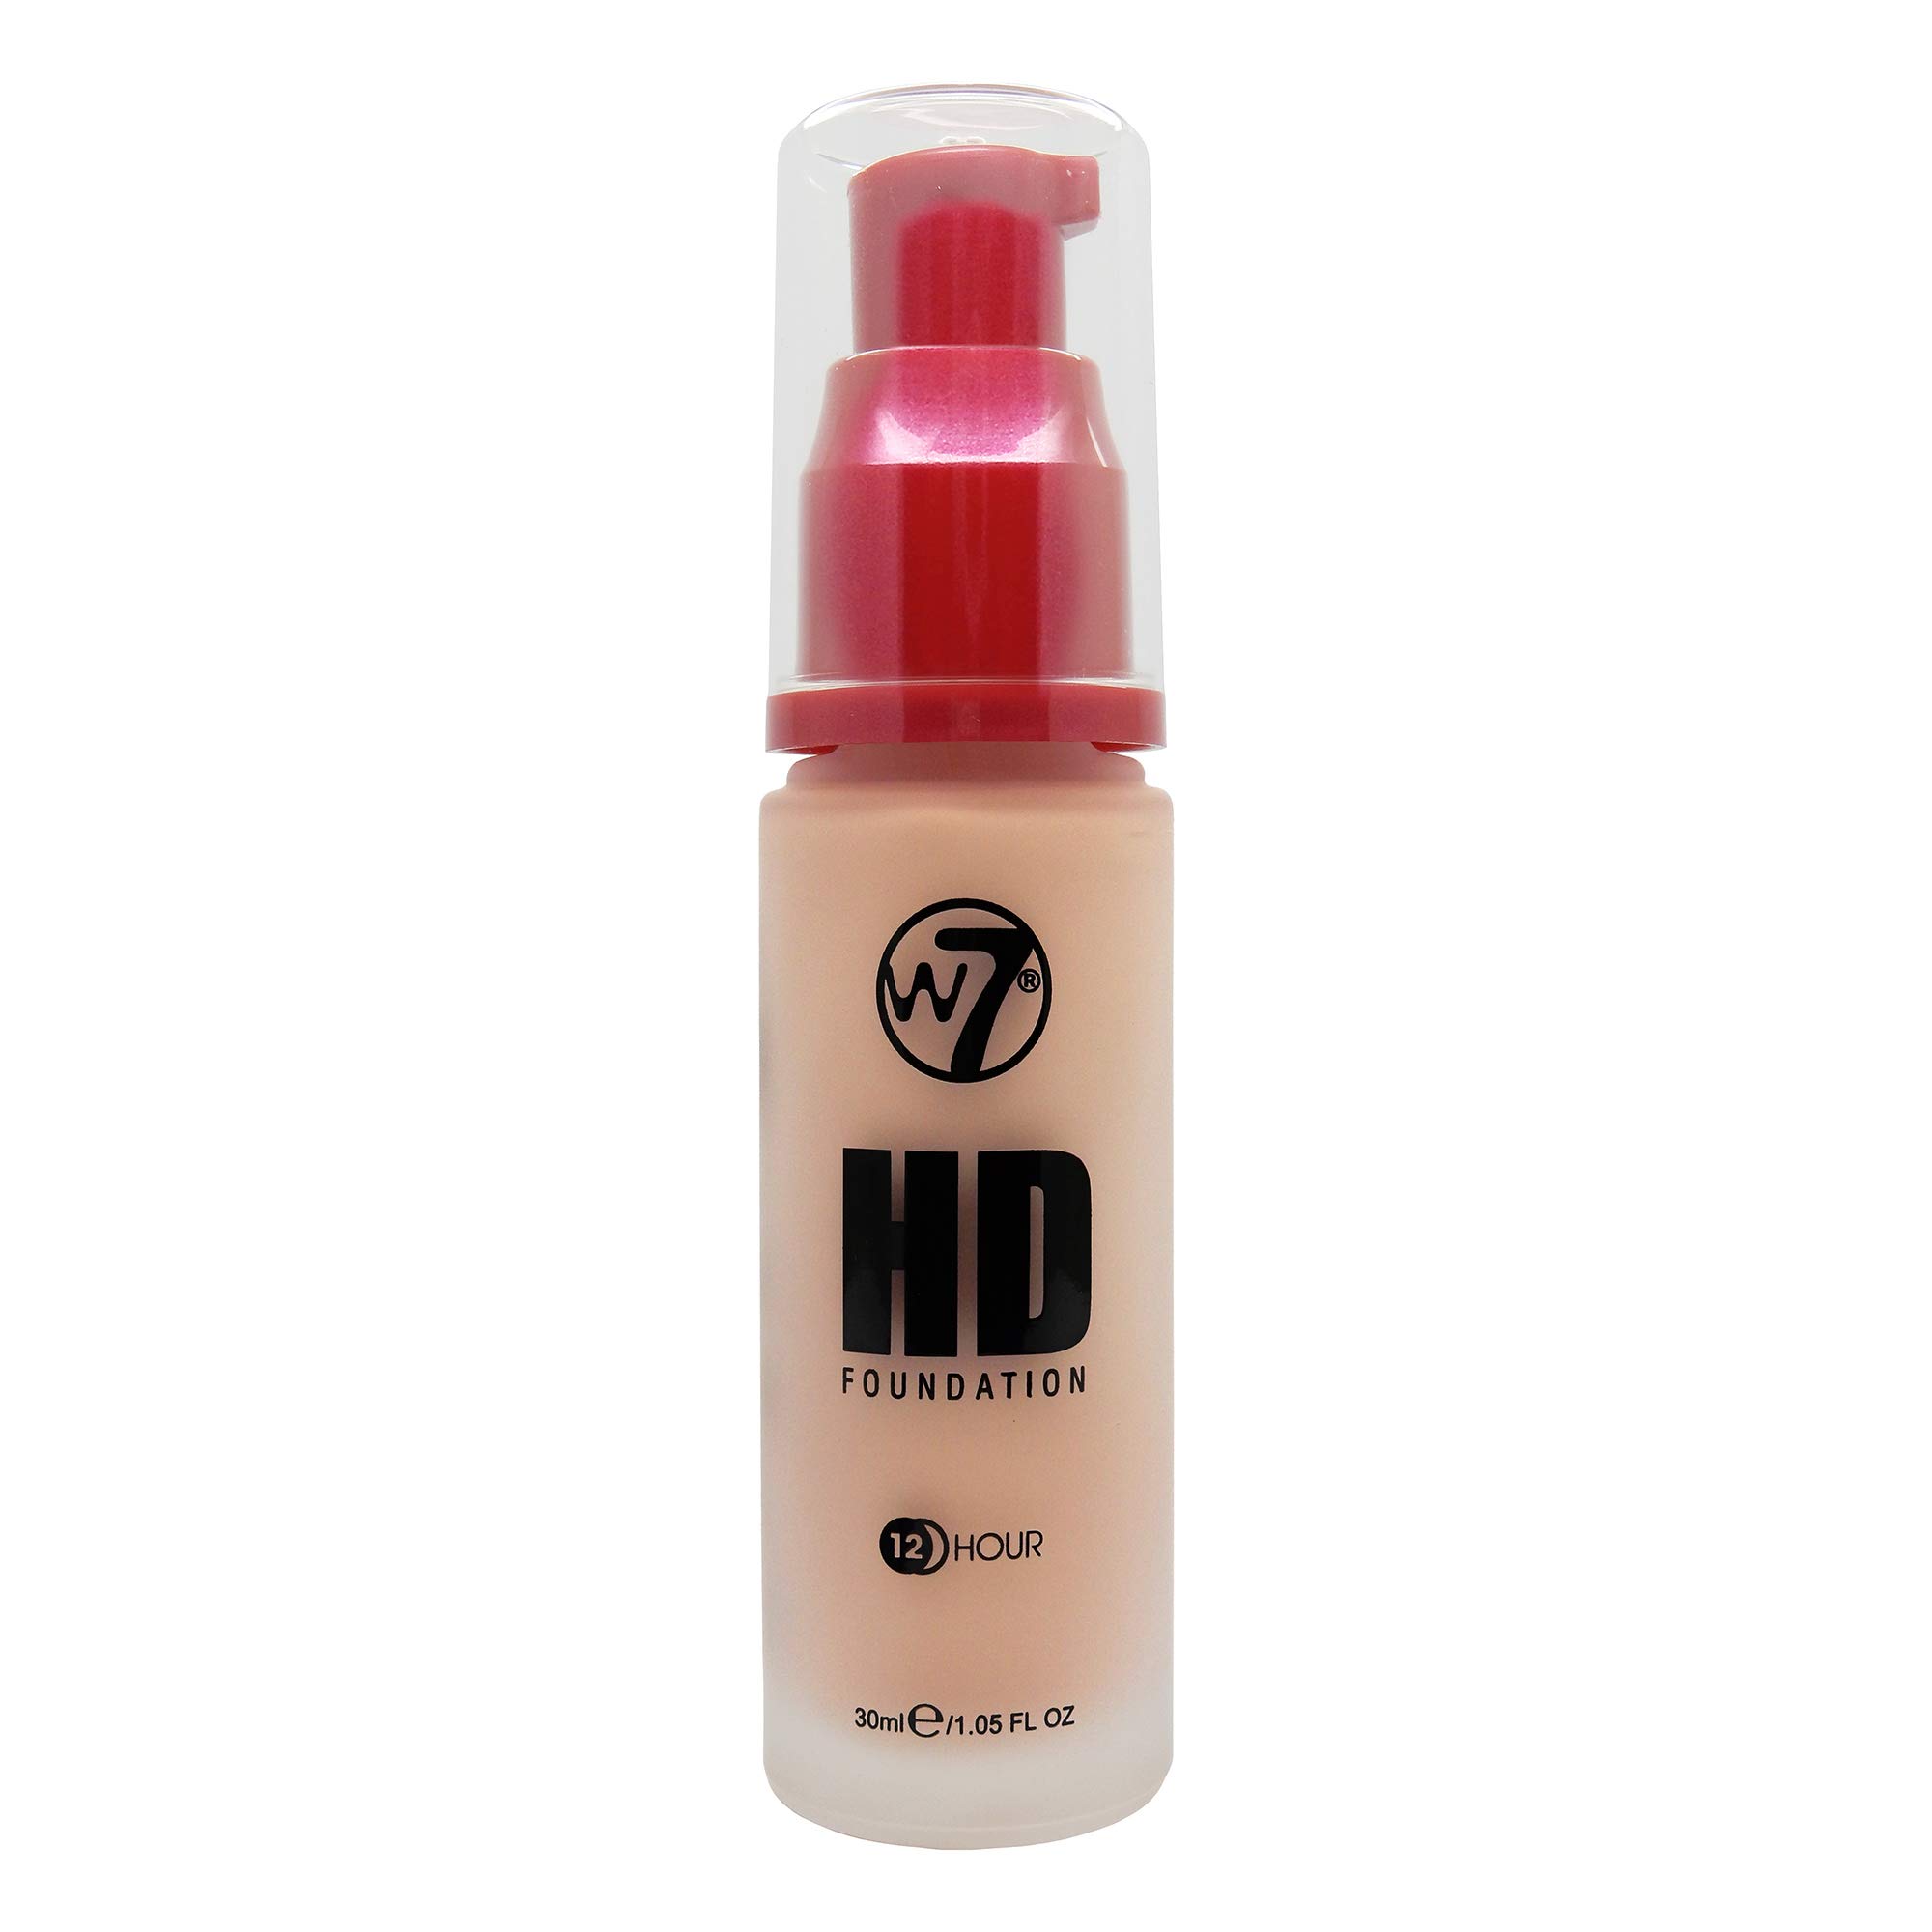 W7  HD Foundation  Rich and creamy Matte Formula  Medium Lasting coverage  Available in 20 Shades  Natural Beige  cruelty Free, 